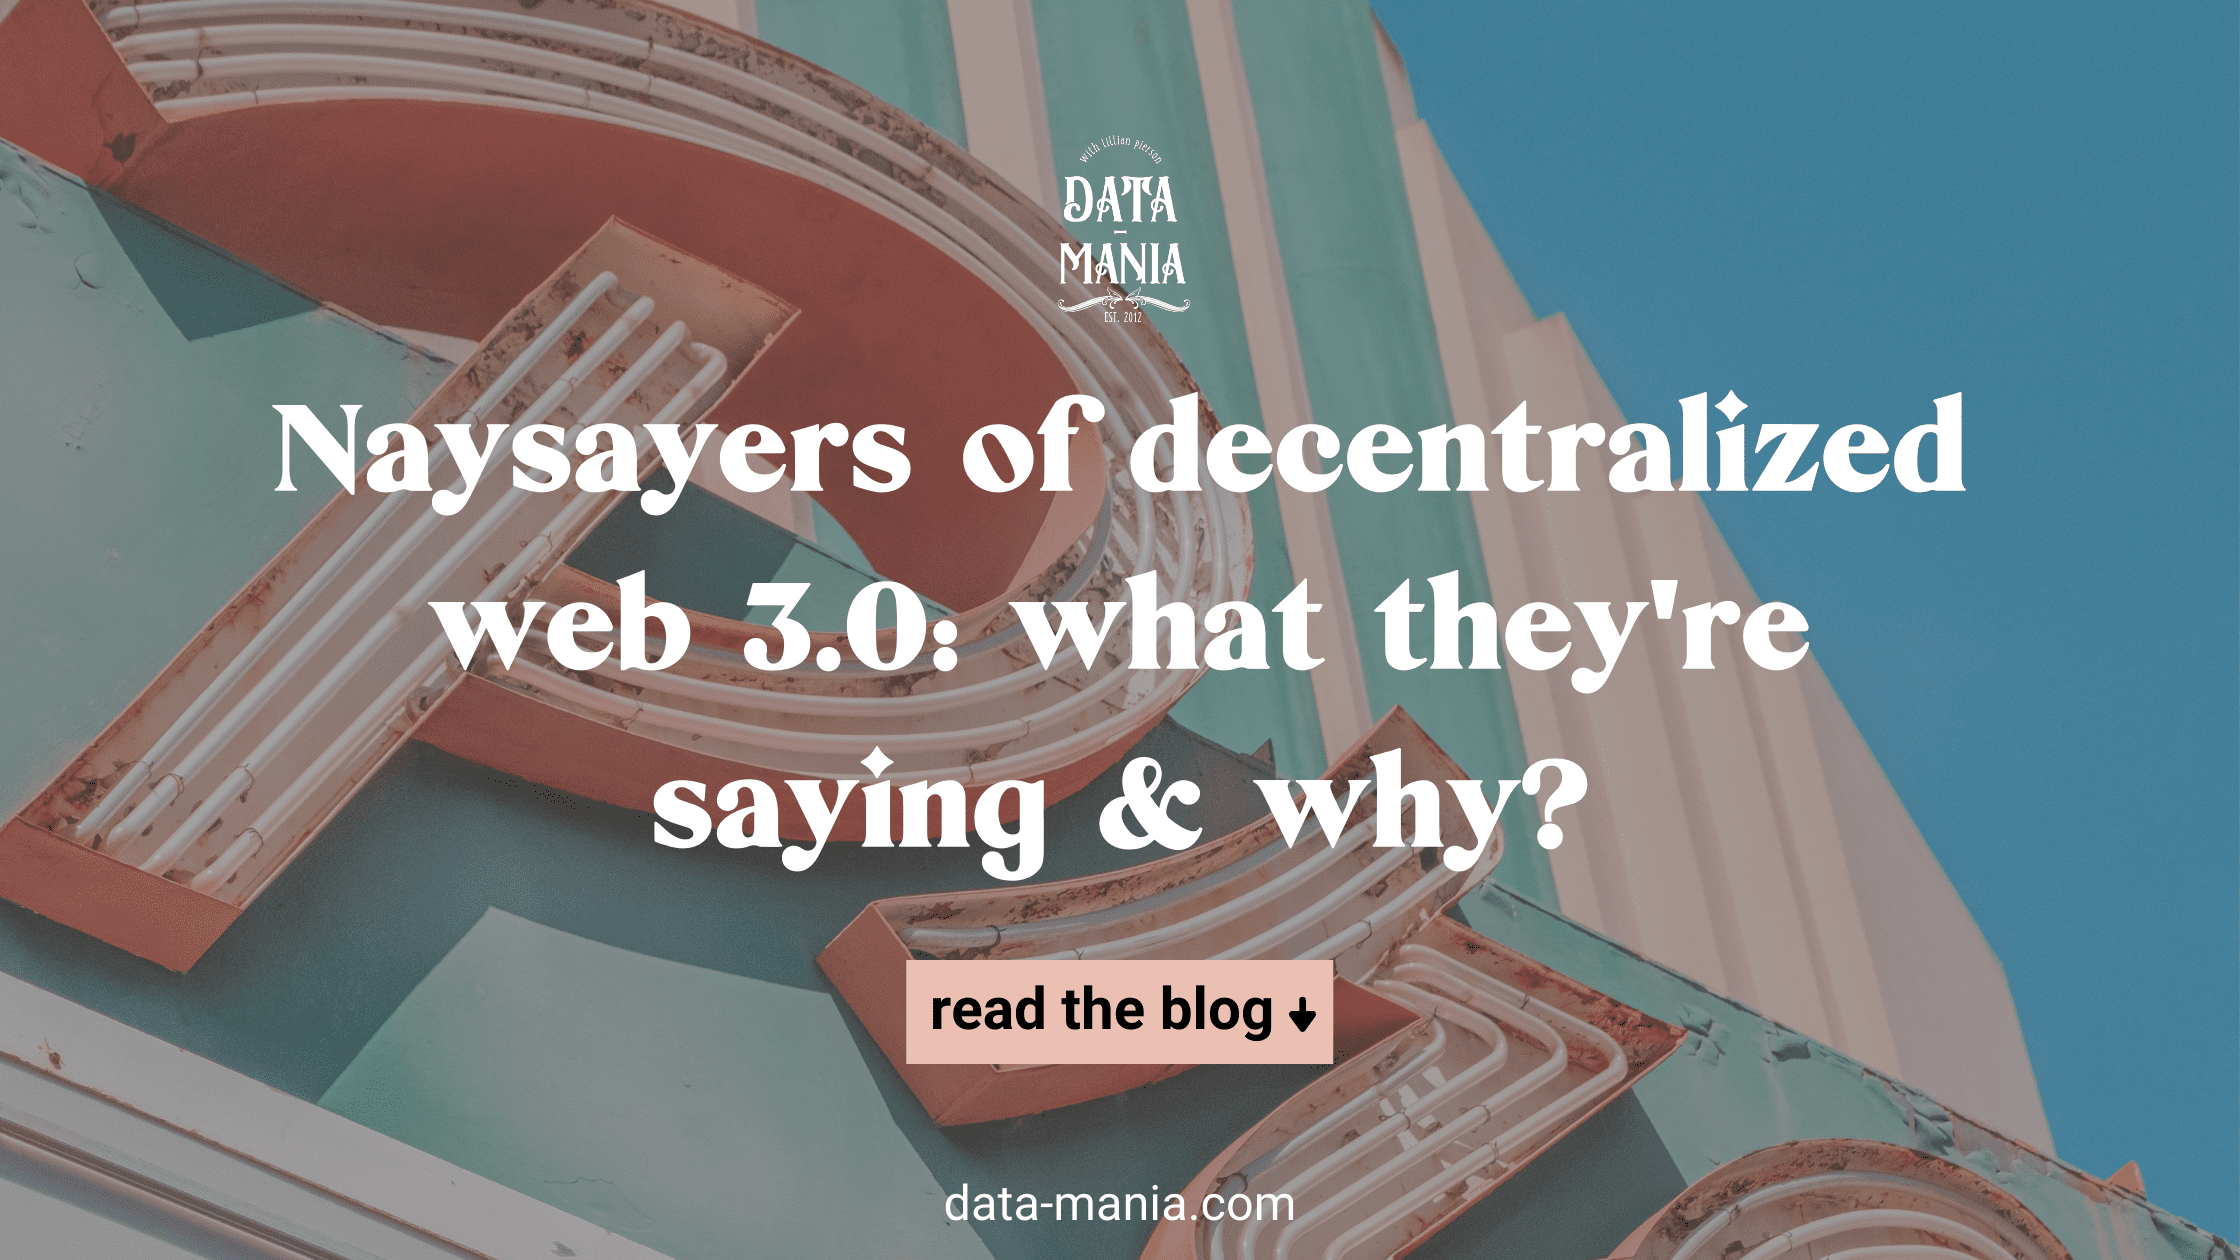 What naysayers are saying about decentralized web and why